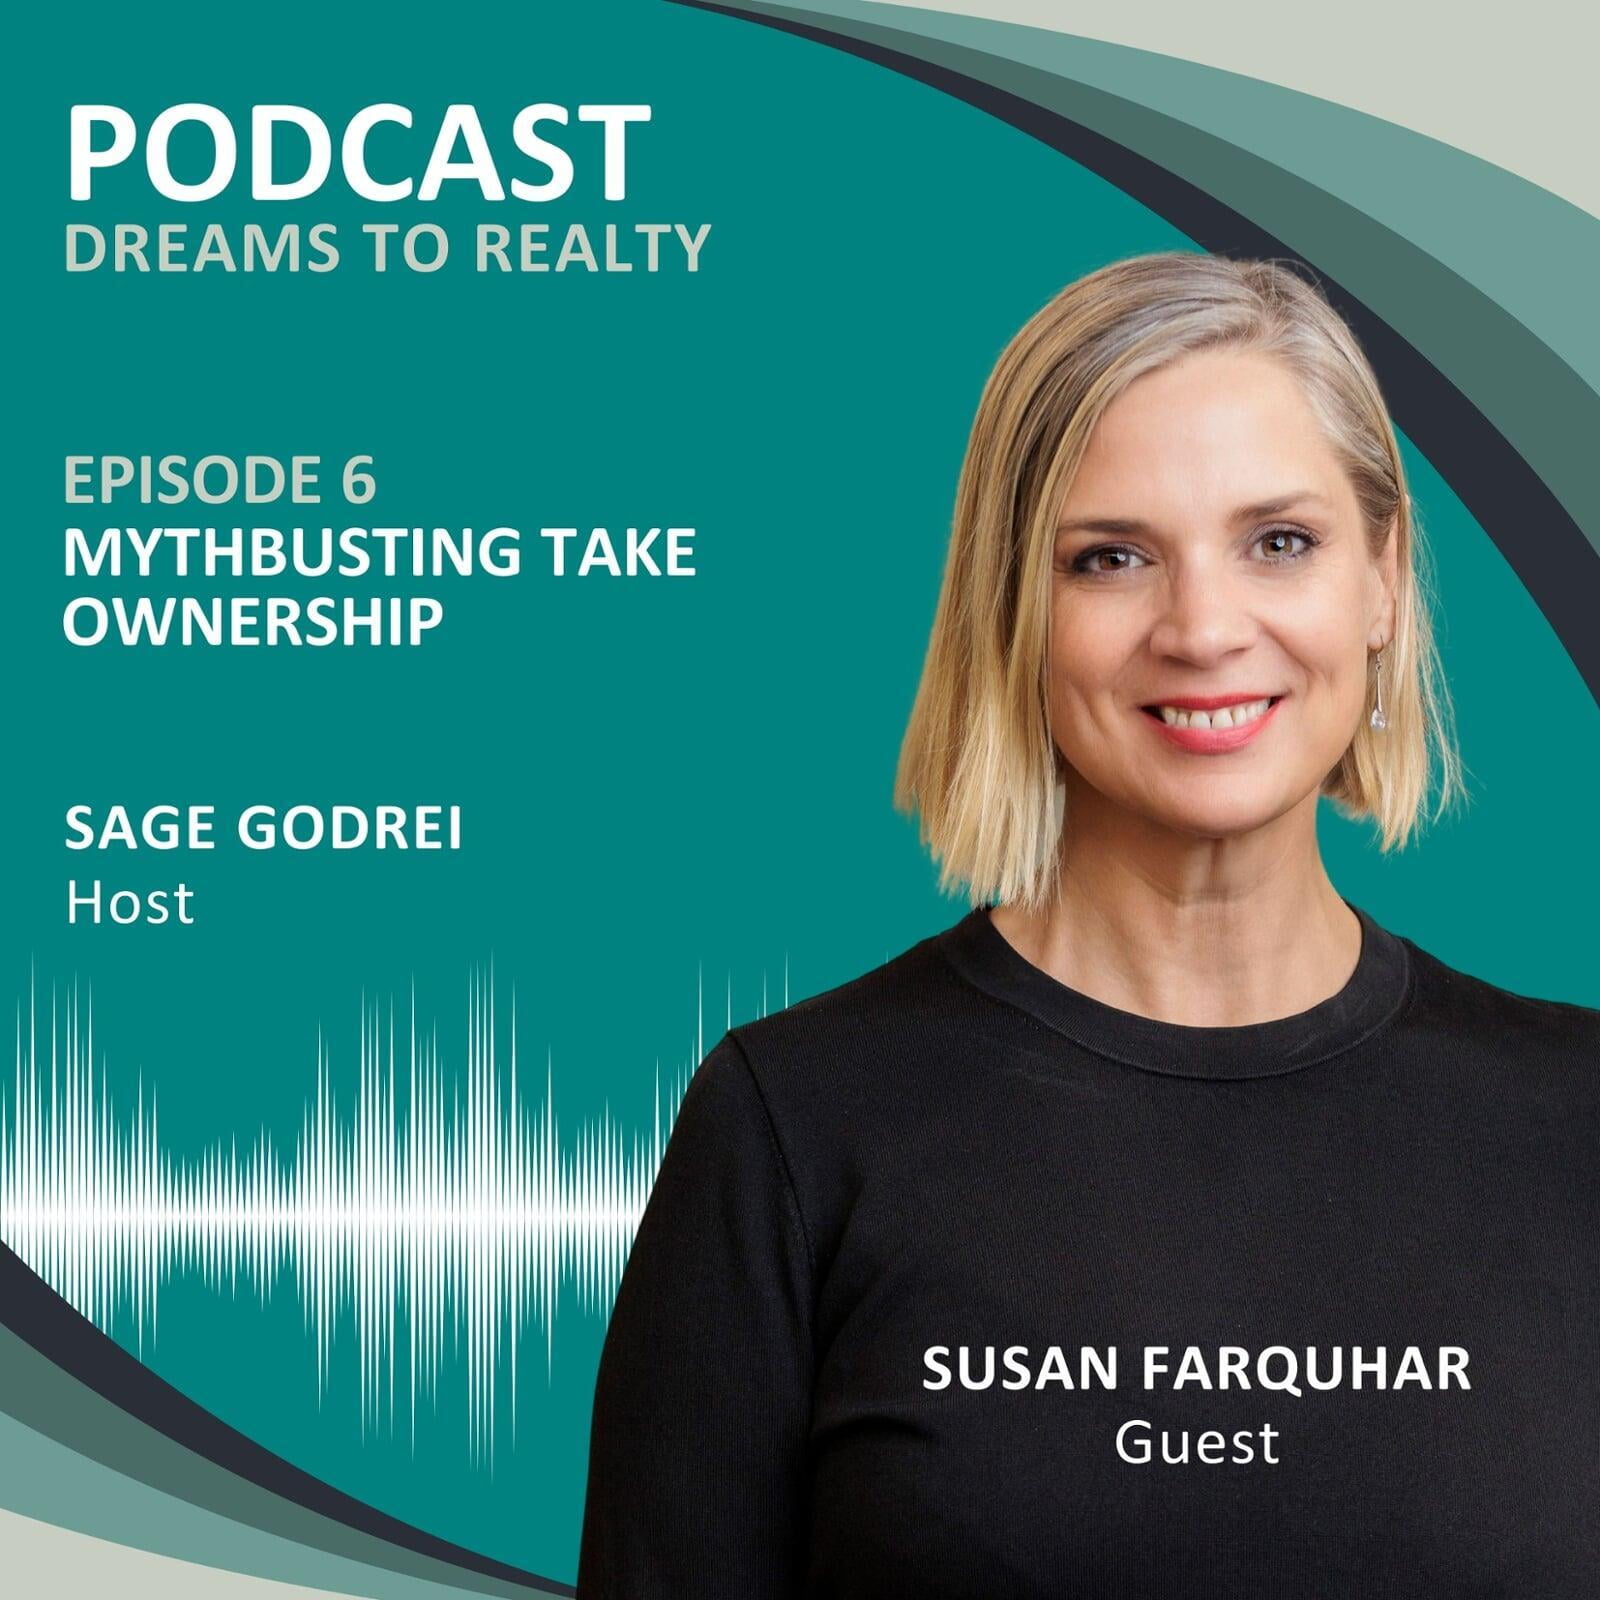 PODCAST: Dreams To Realty Property Investment Insights - Episode 6 Mythbusting Take Ownership